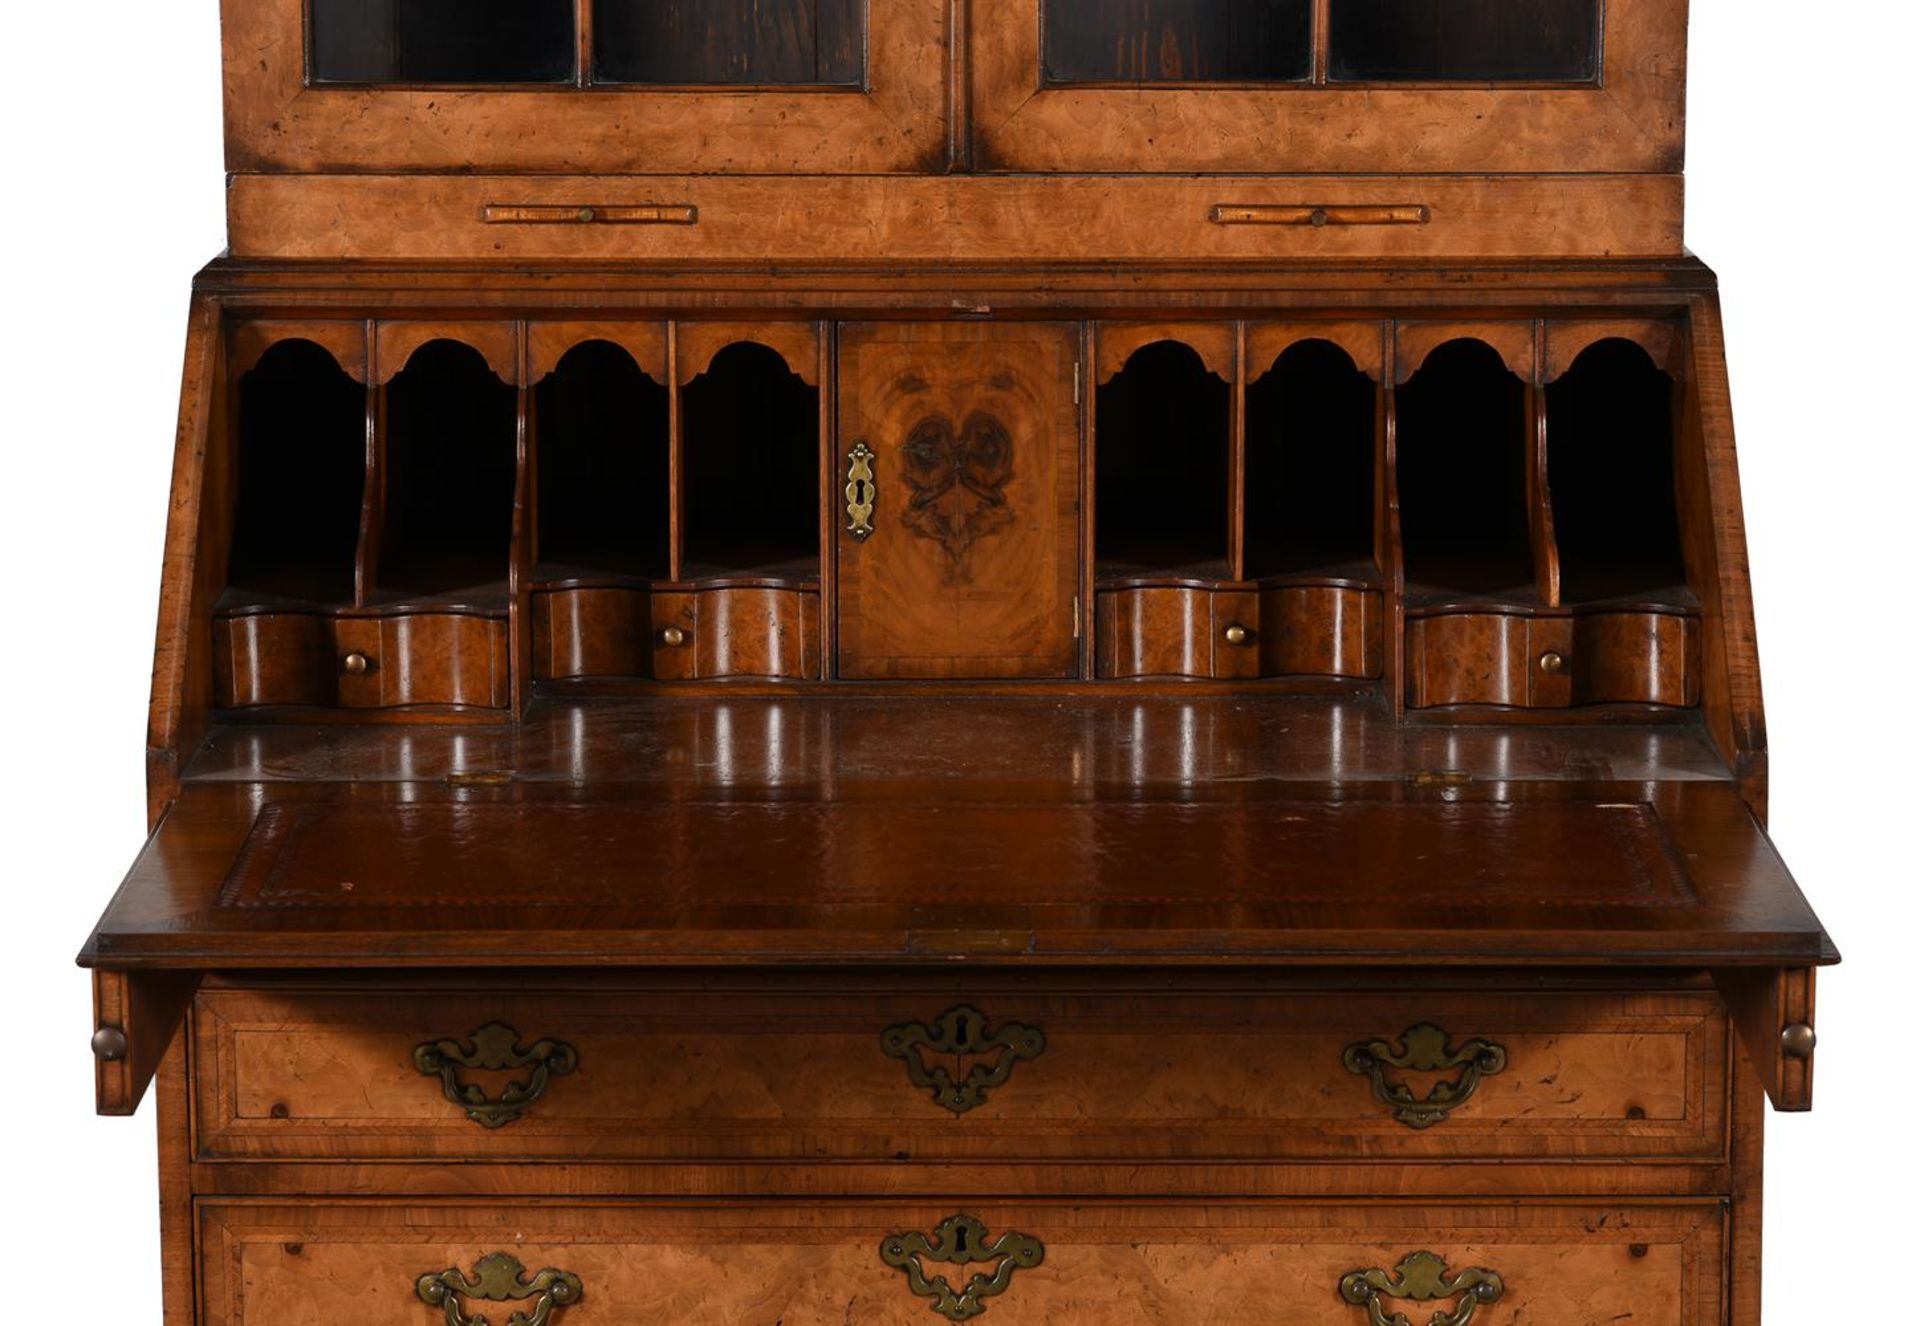 A WALNUT DOUBLE-DOME TOP BUREAU BOOKCASE IN QUEEN ANNE STYLE - Image 3 of 8